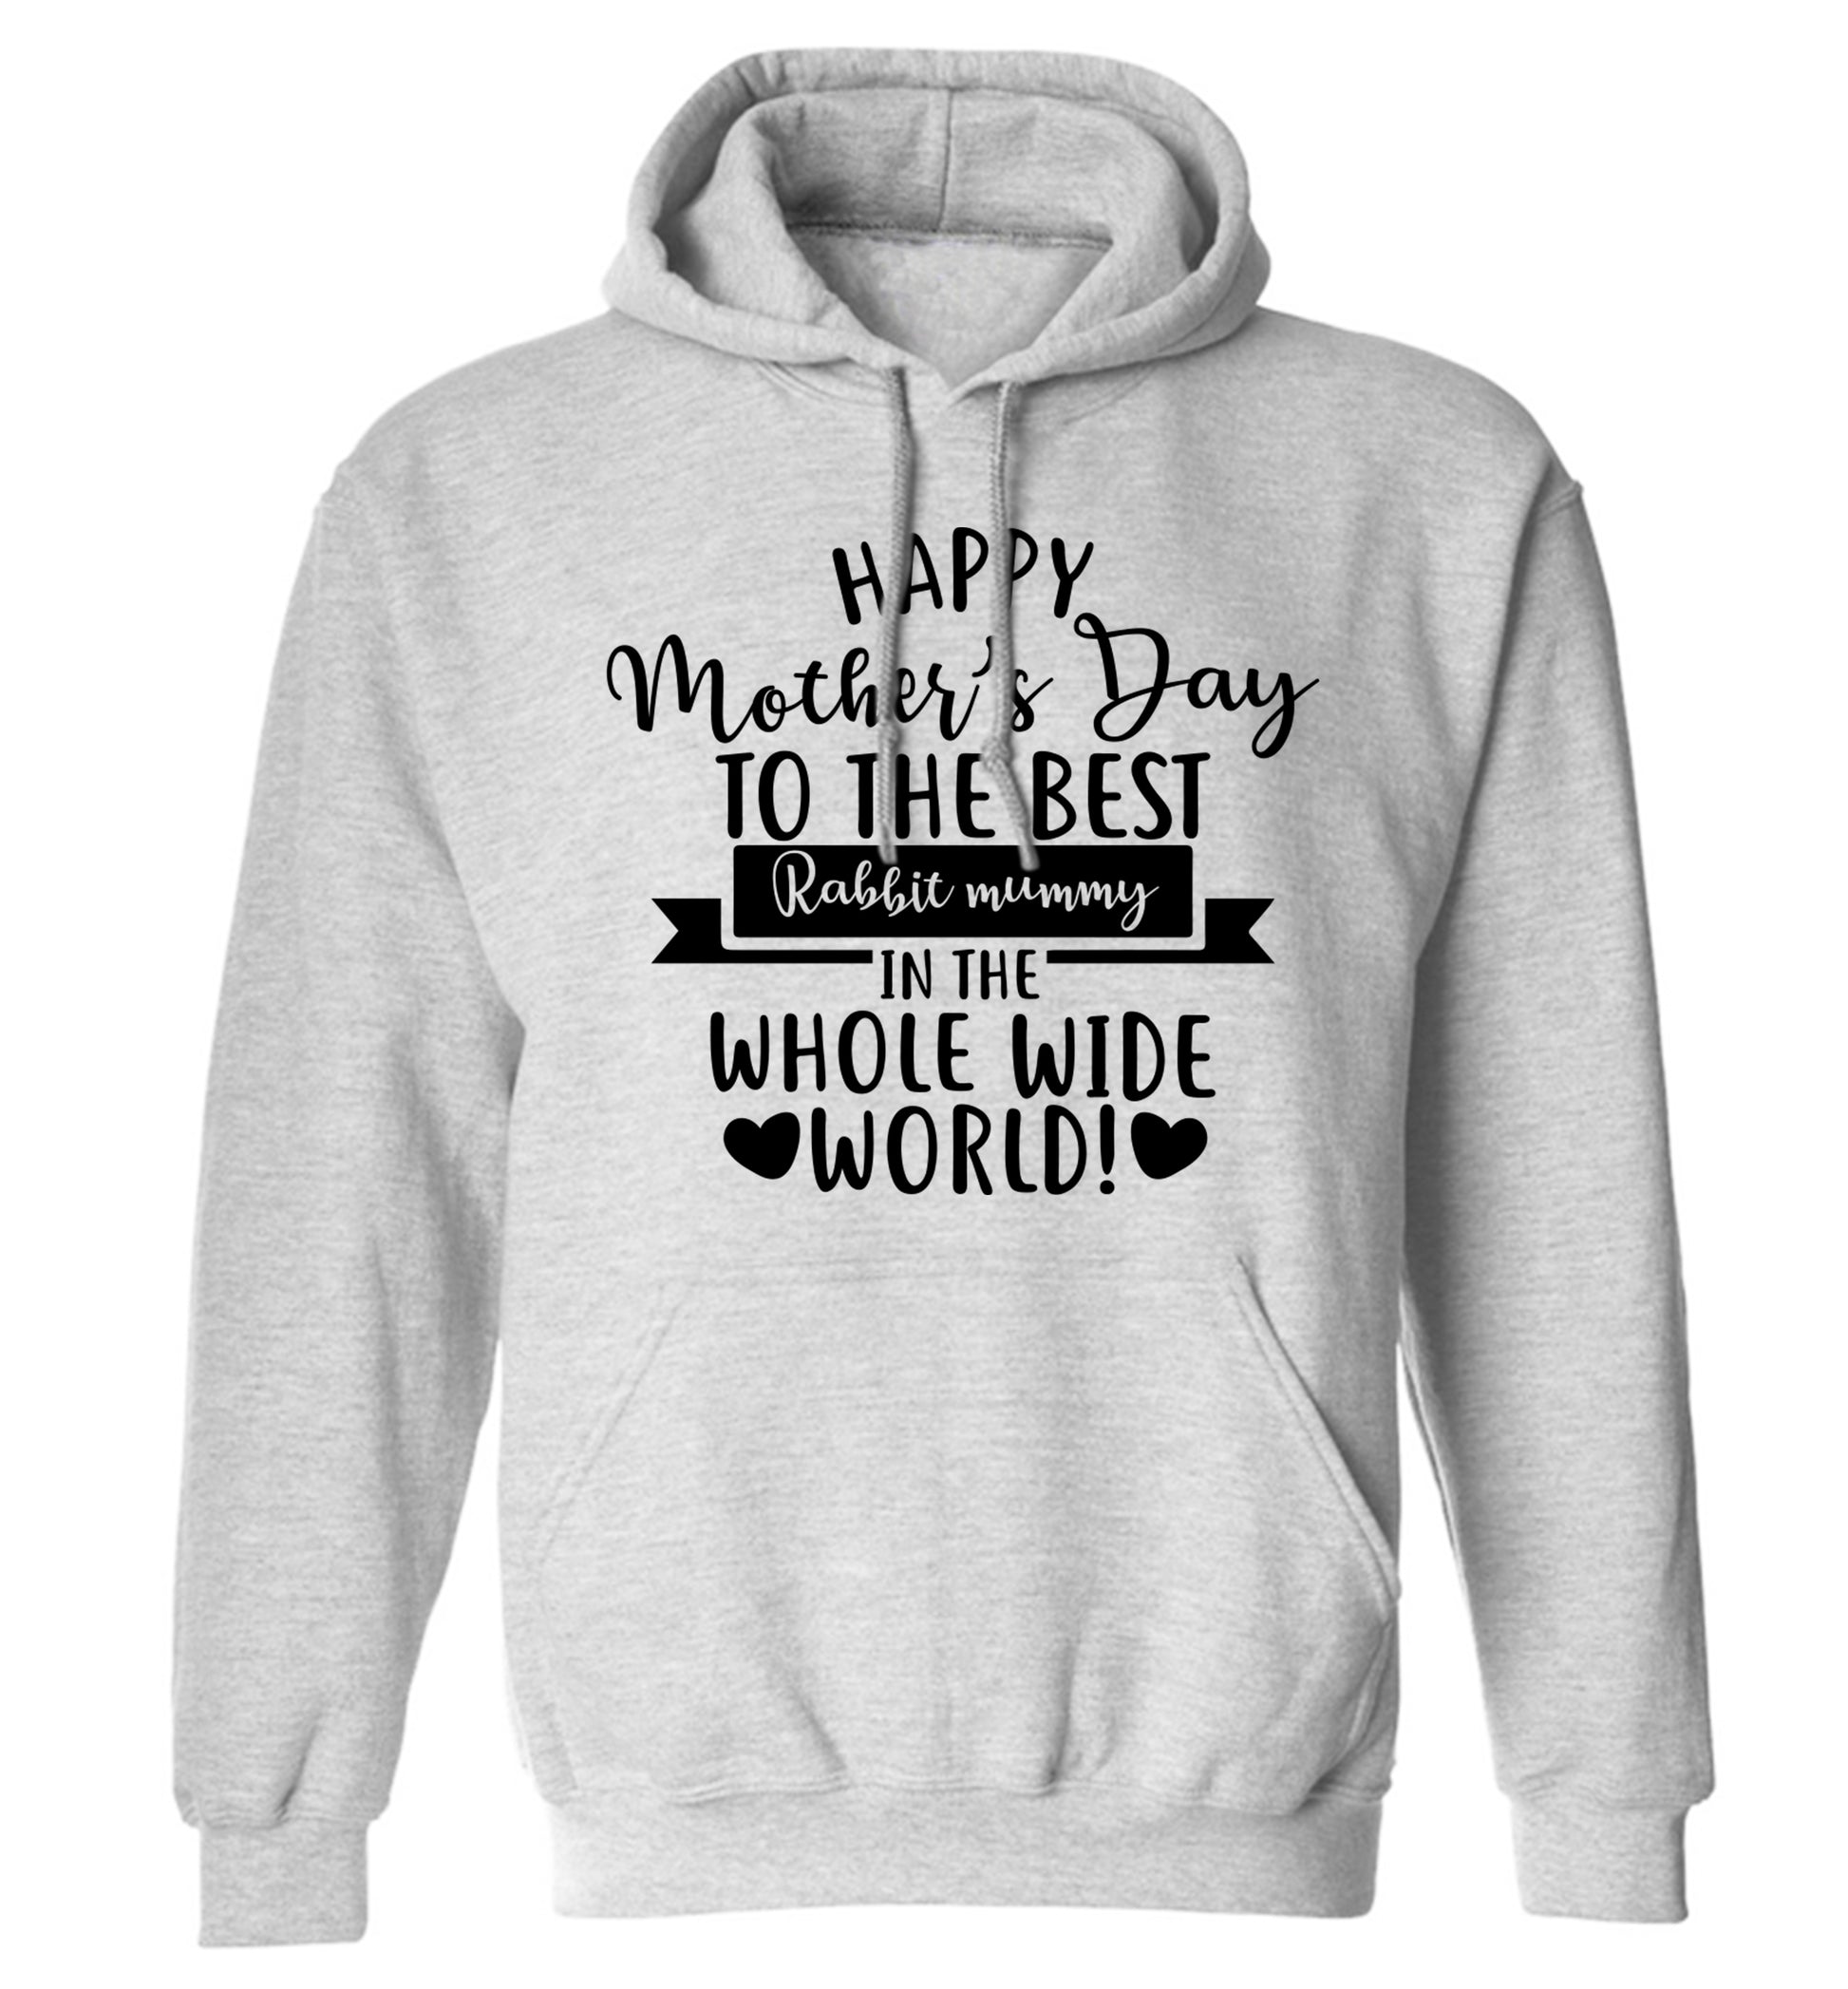 Happy mother's day to the best rabbit mummy in the world adults unisex grey hoodie 2XL